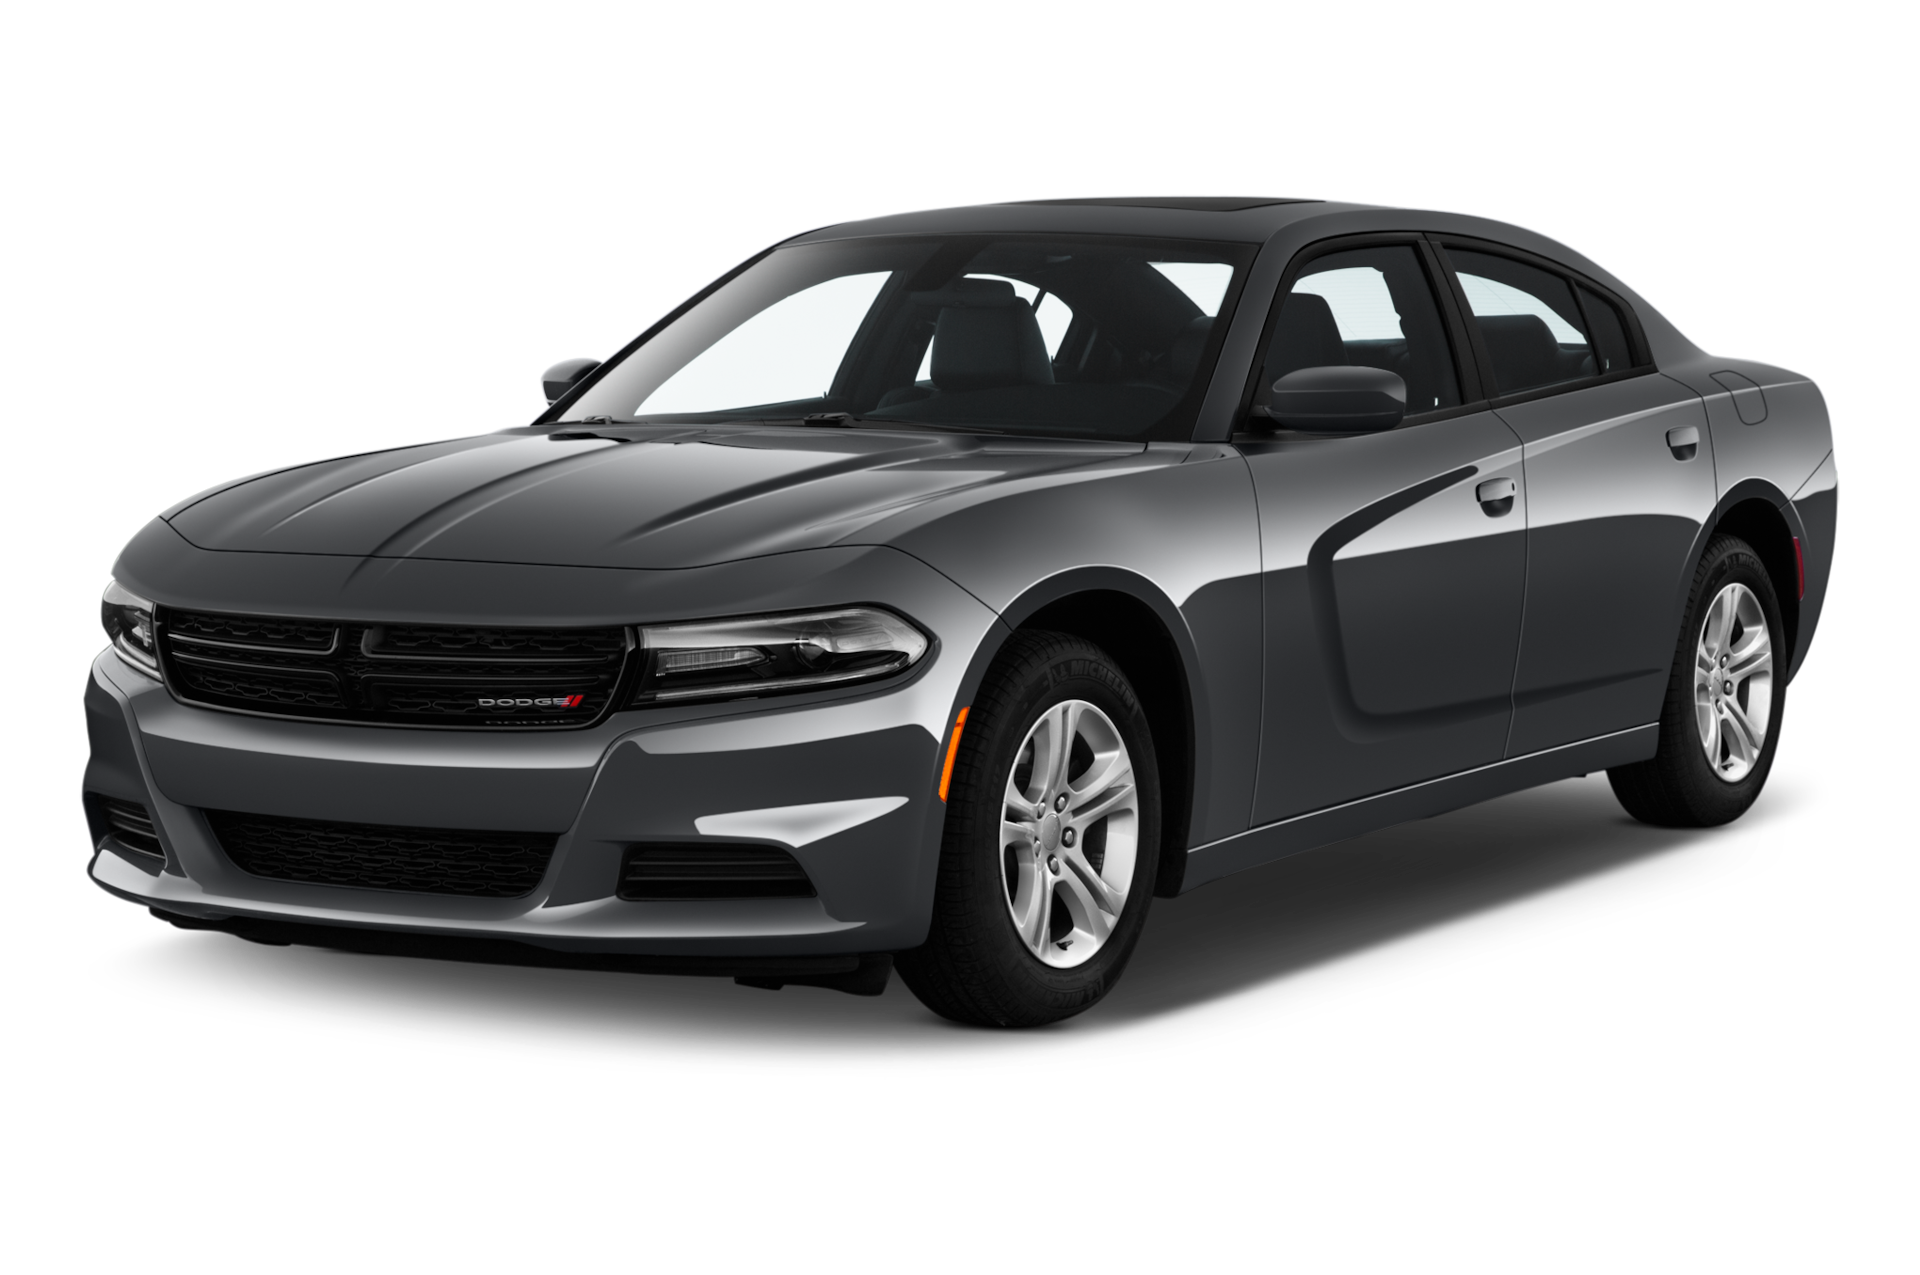 2019 Dodge Charger Prices, Reviews, and Photos - MotorTrend